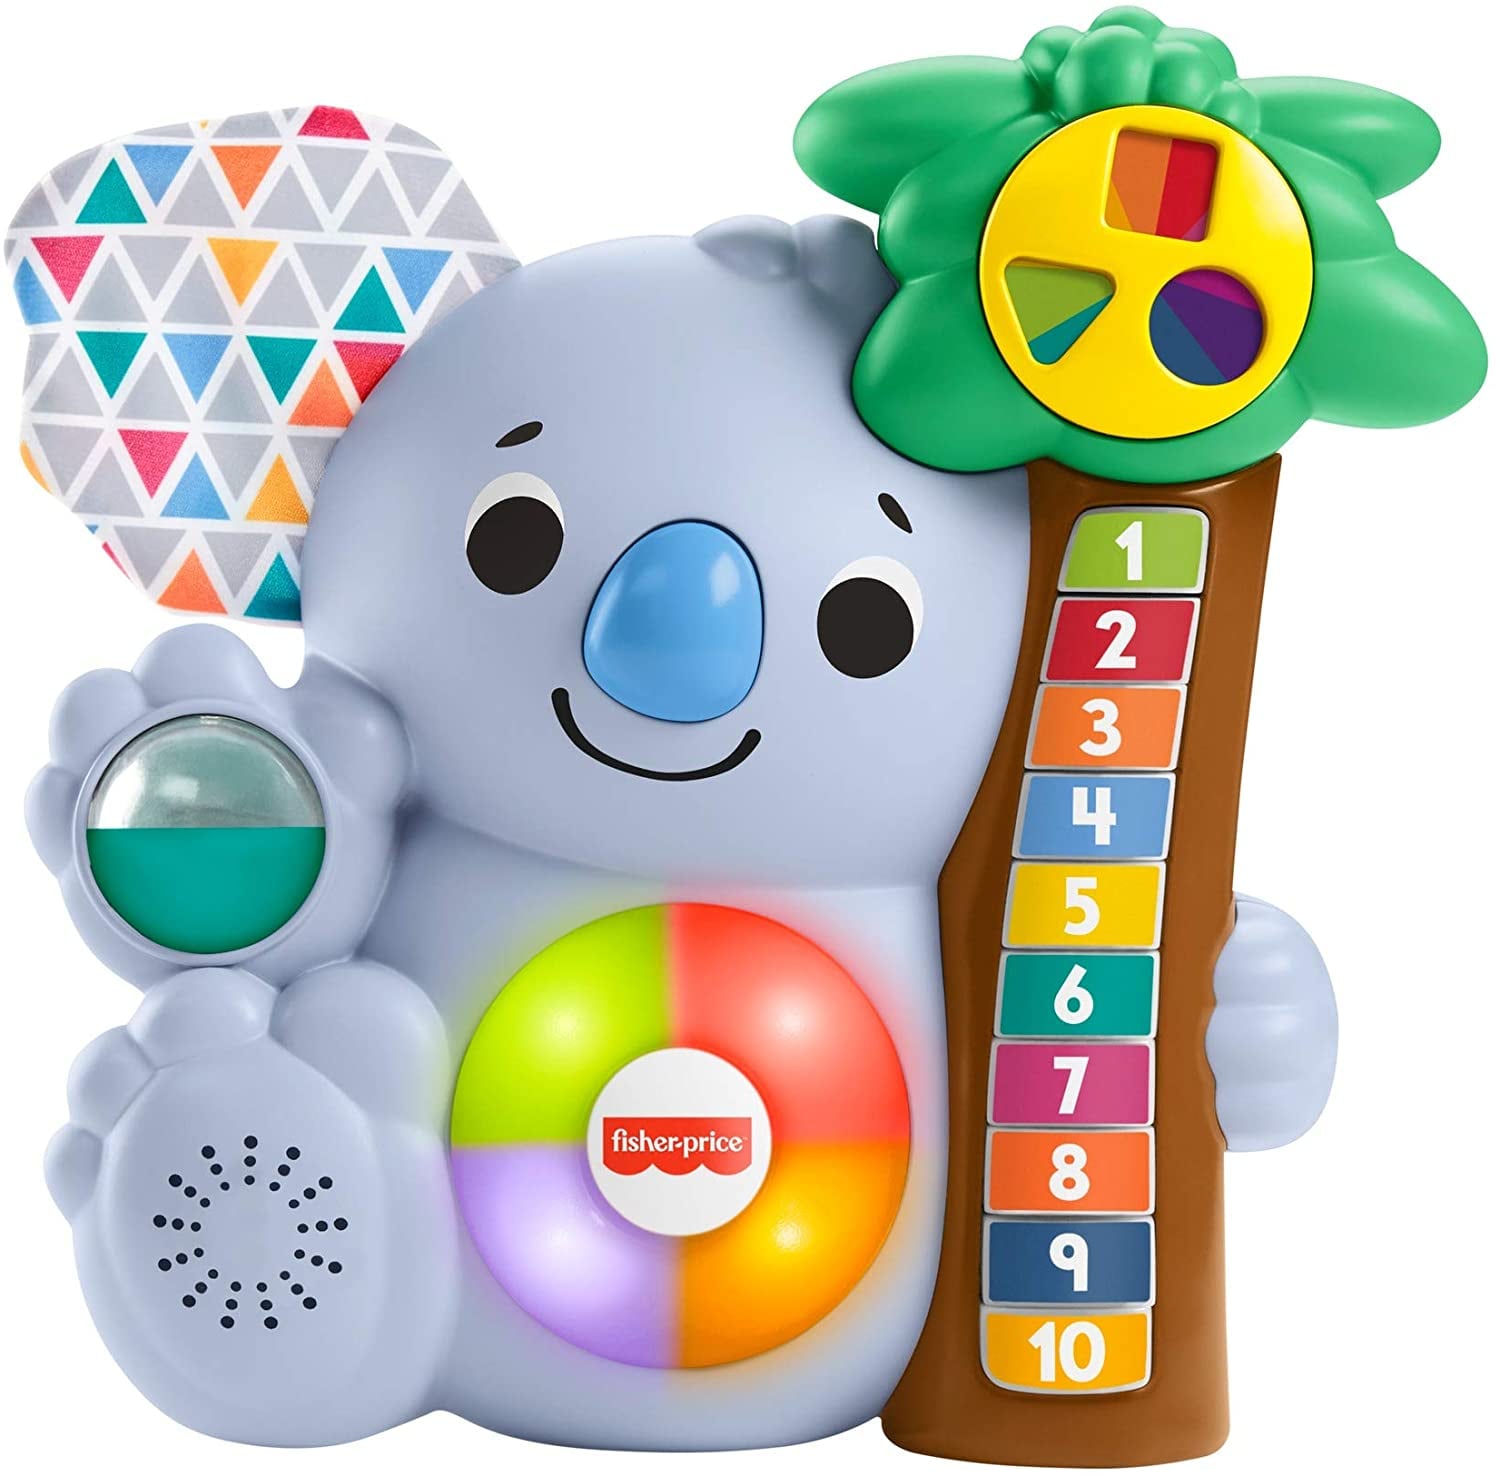 Toys That Teach Kids Counting, Sorting, and Maths